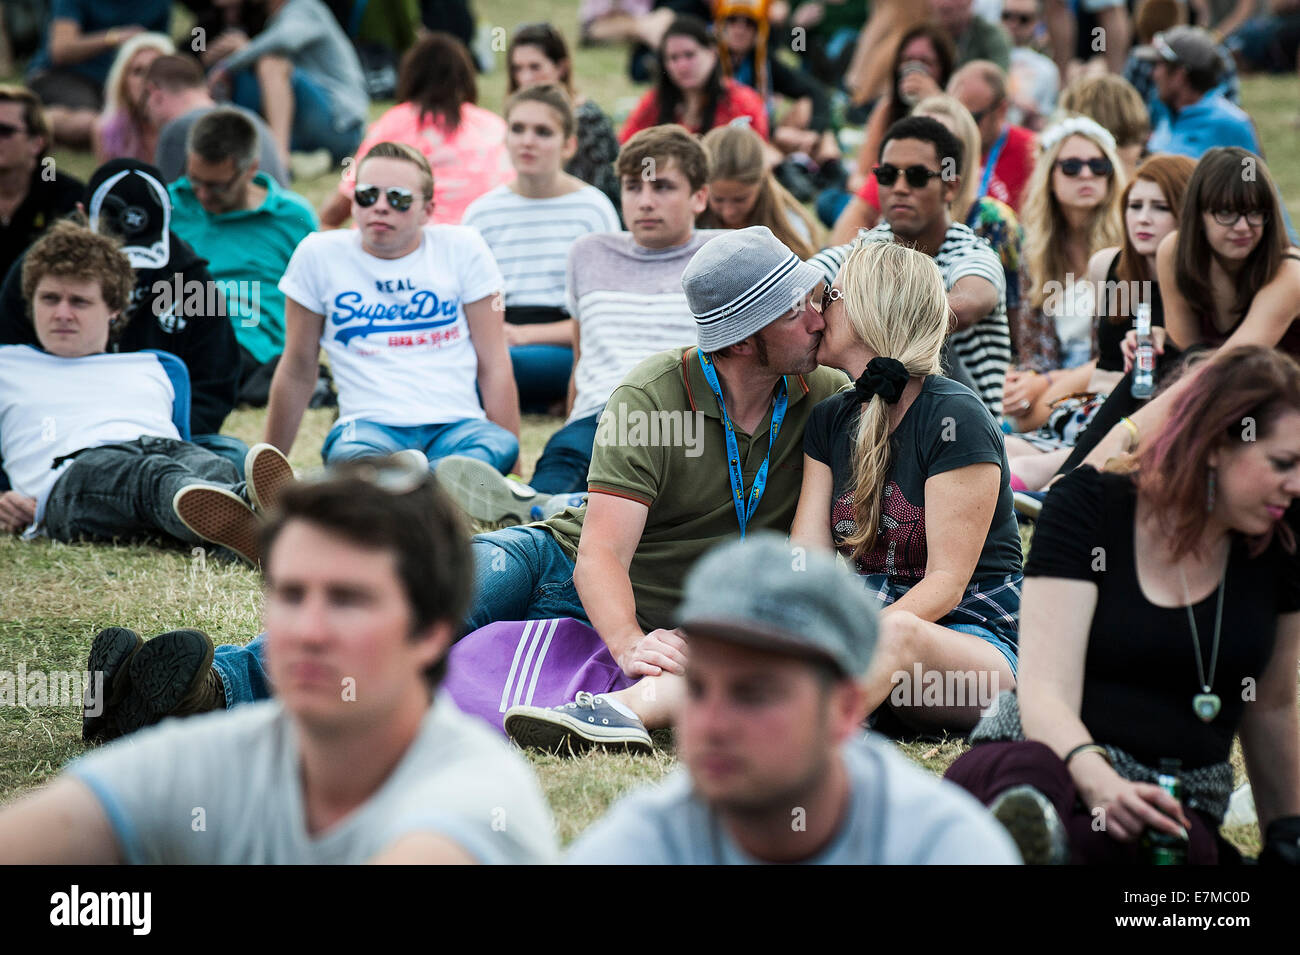 Festivalgoers kissing at the Brownstock Festival in Essex. Stock Photo